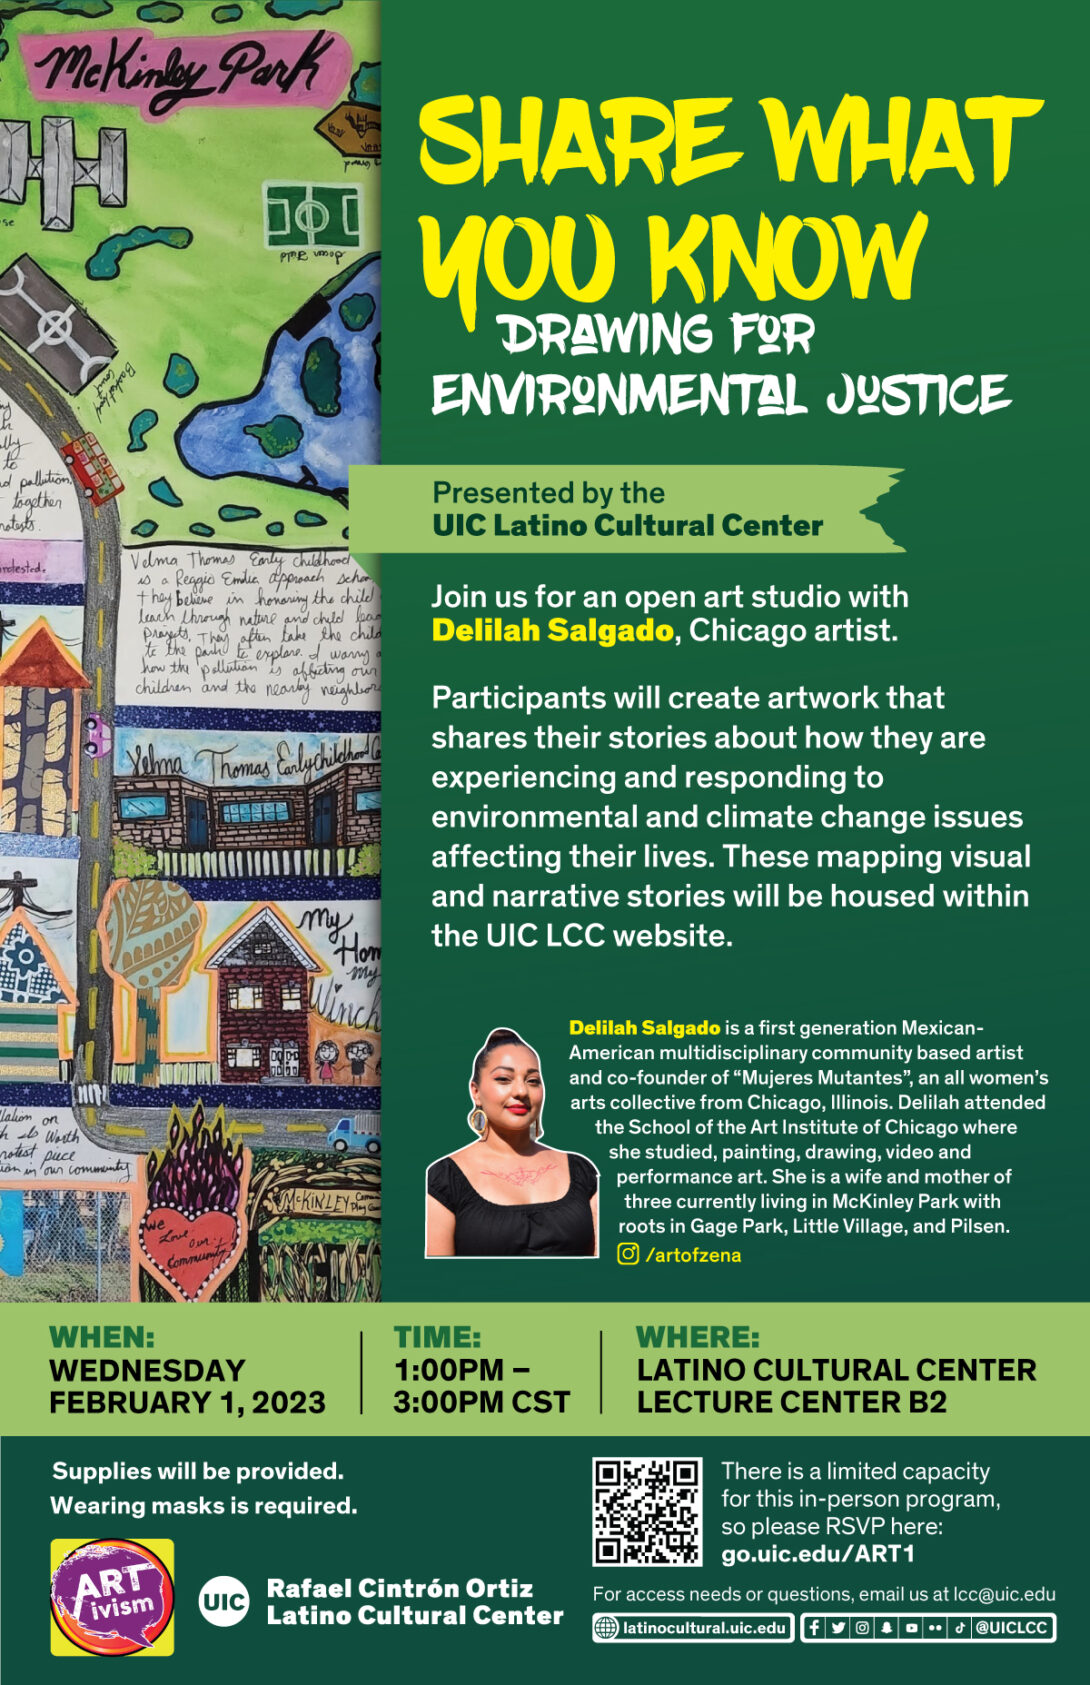 Green poster background with a creative drawn map of the McKinley neighborhood on the left and the artist photo and bio for Delilah Salgado on the right. The poster is shades of green and yellow and title reads 